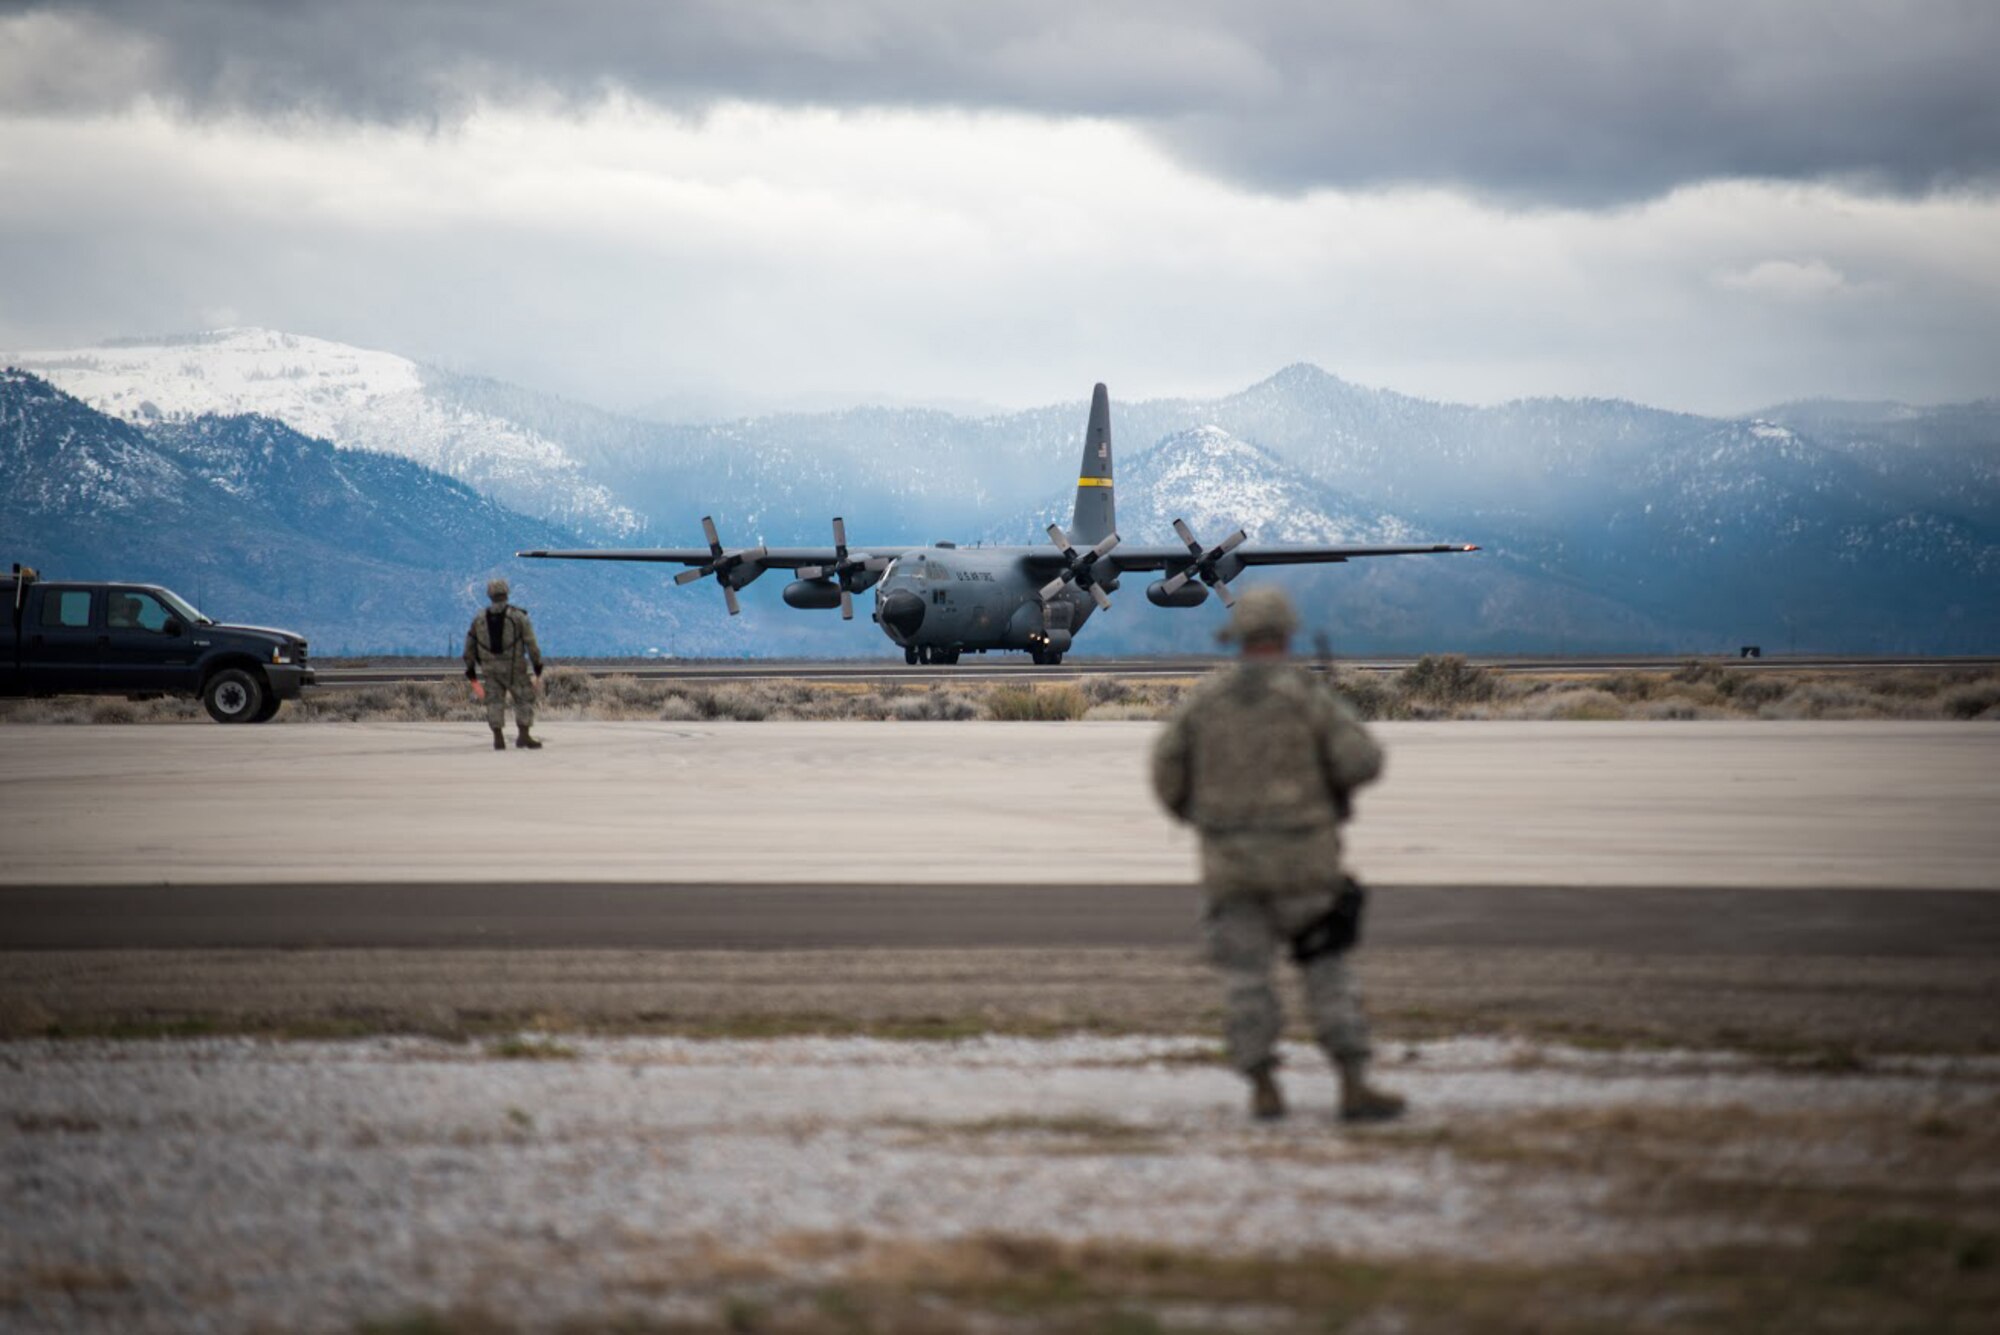 Members of the Kentucky Air National Guard’s 123rd Contingency Response Group prepare to unload a Wyoming Air National Guard C-130 Hercules at Amedee Army Airfield, Calif., on March 8, 2016. The 123rd CRG is working in conjunction with the U.S. Army’s 688th Rapid Port Opening Element and a team from the Defense Logistics Agency to operate Joint Task Force-Port Opening Sangala during a week-long exercise called Operation Lumberjack. The objective of the JTF-PO is to establish an aerial port of debarkation, provide initial distribution capability and set up warehousing for distribution beyond a forward node. (Kentucky Air National Guard photo by Master Sgt. Phil Speck)